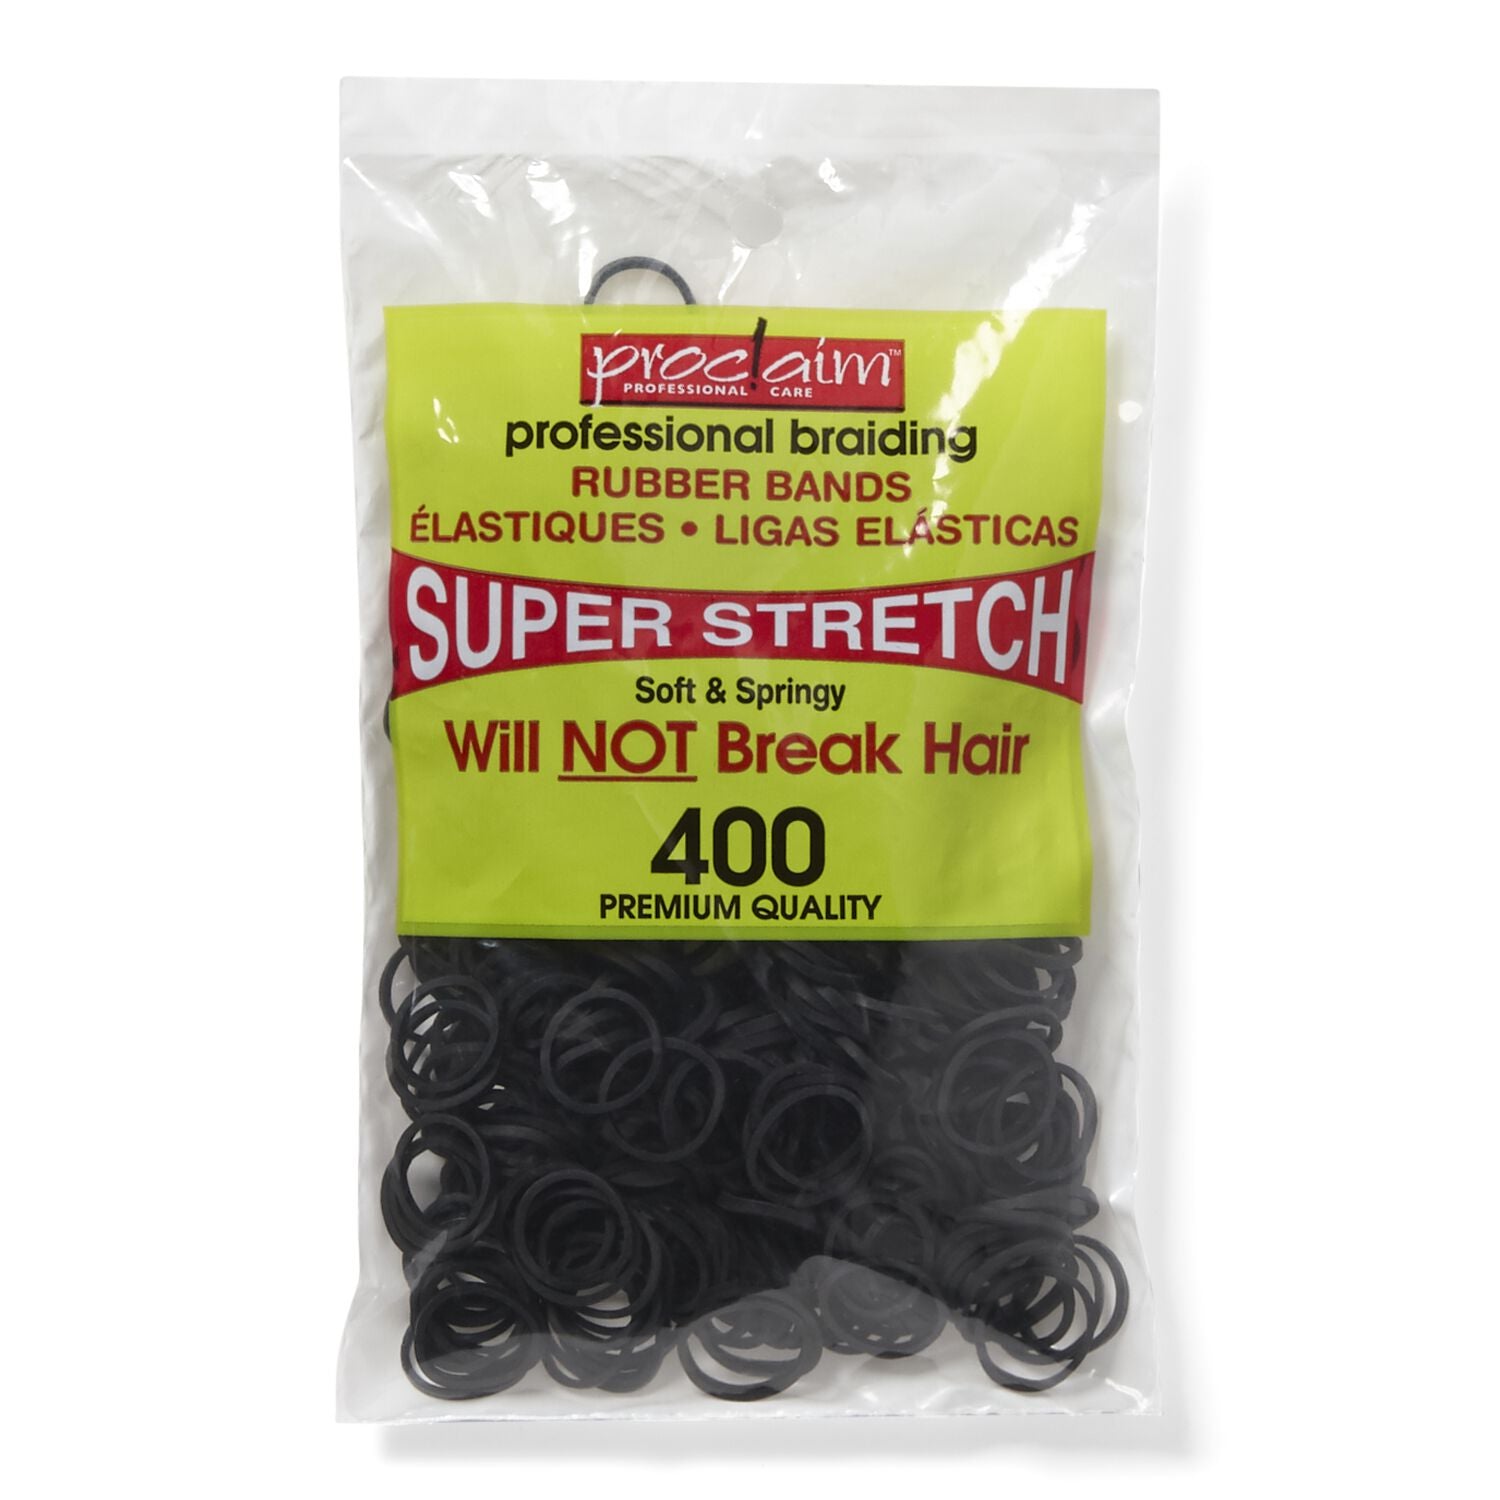 Proclaim Rubber Bands Black 400 Count